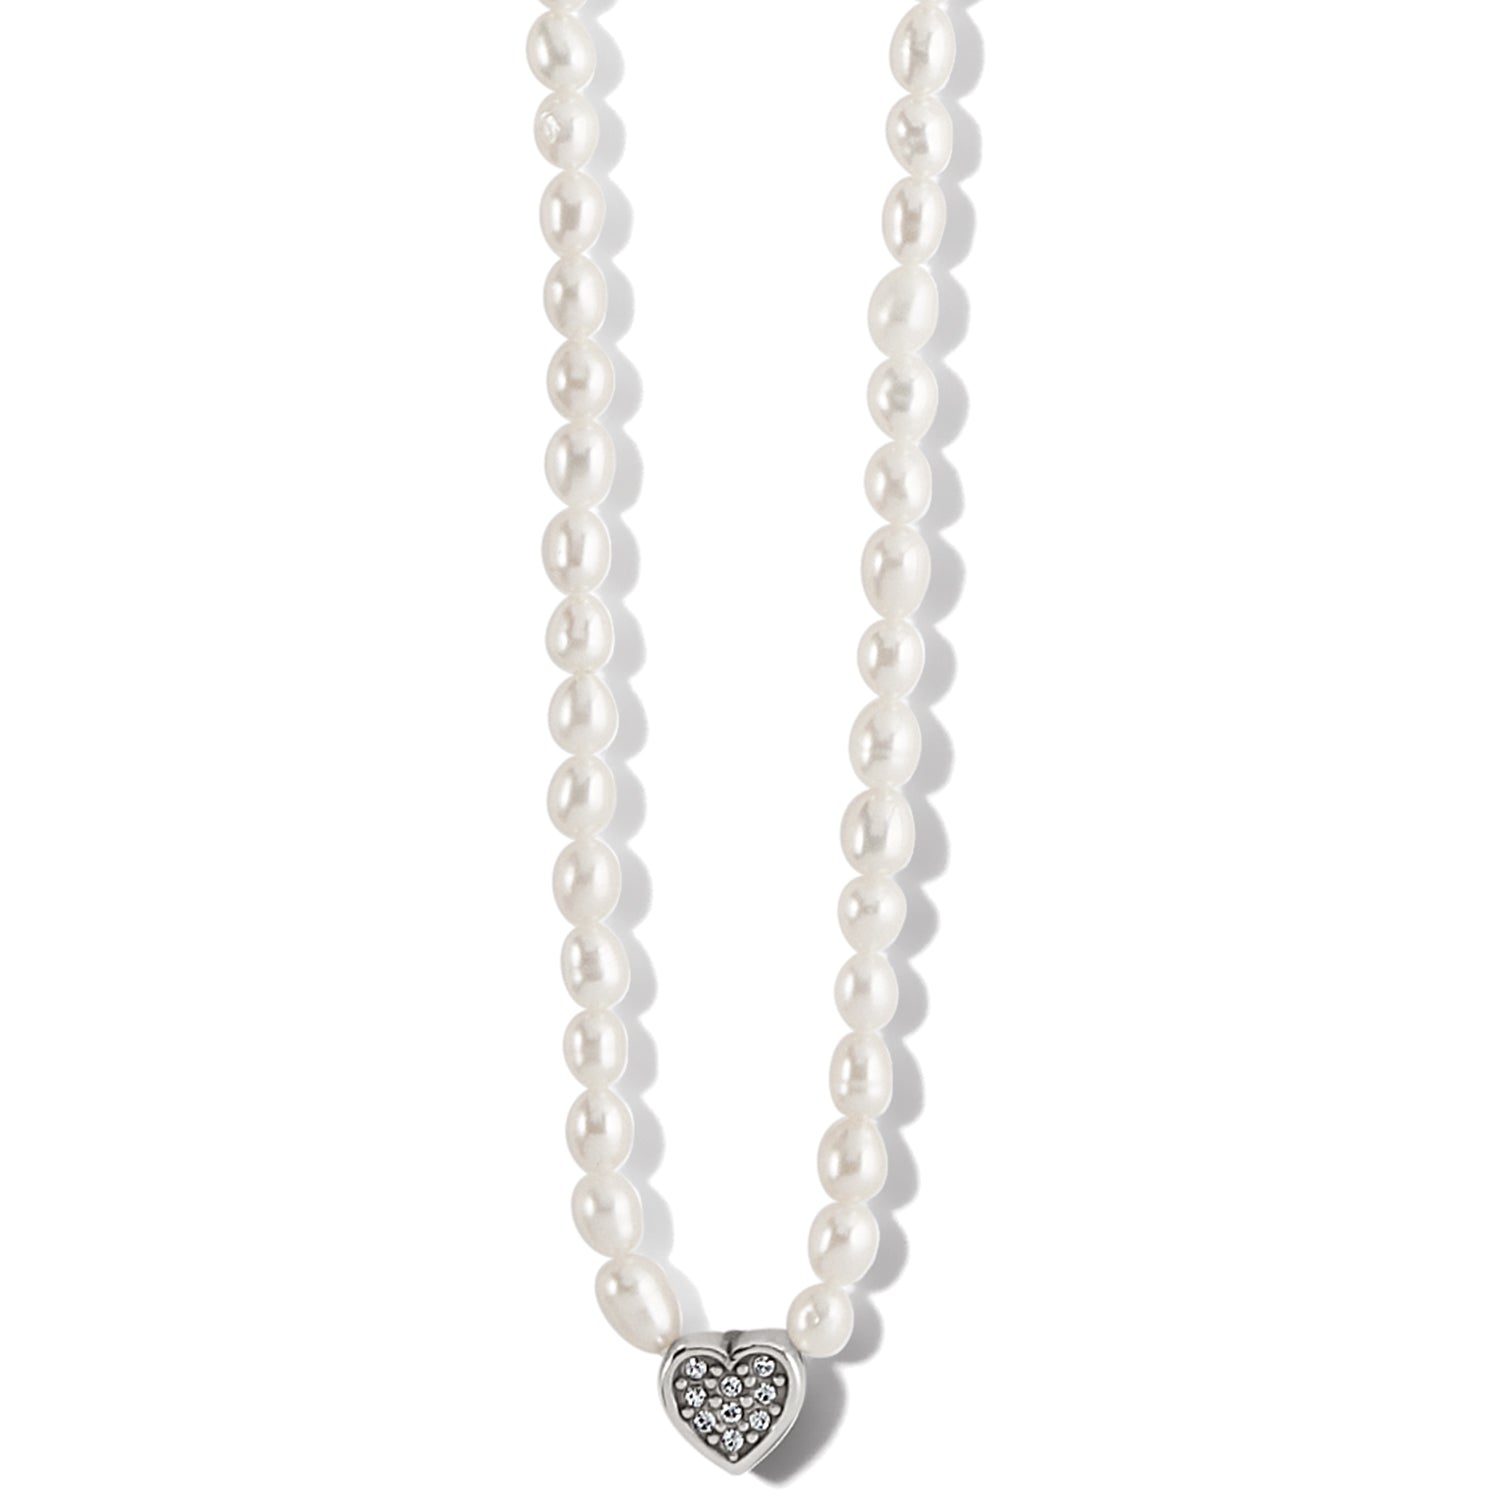 Meridian Zenith Heart Pearl Necklace - Image 1 - Brighton